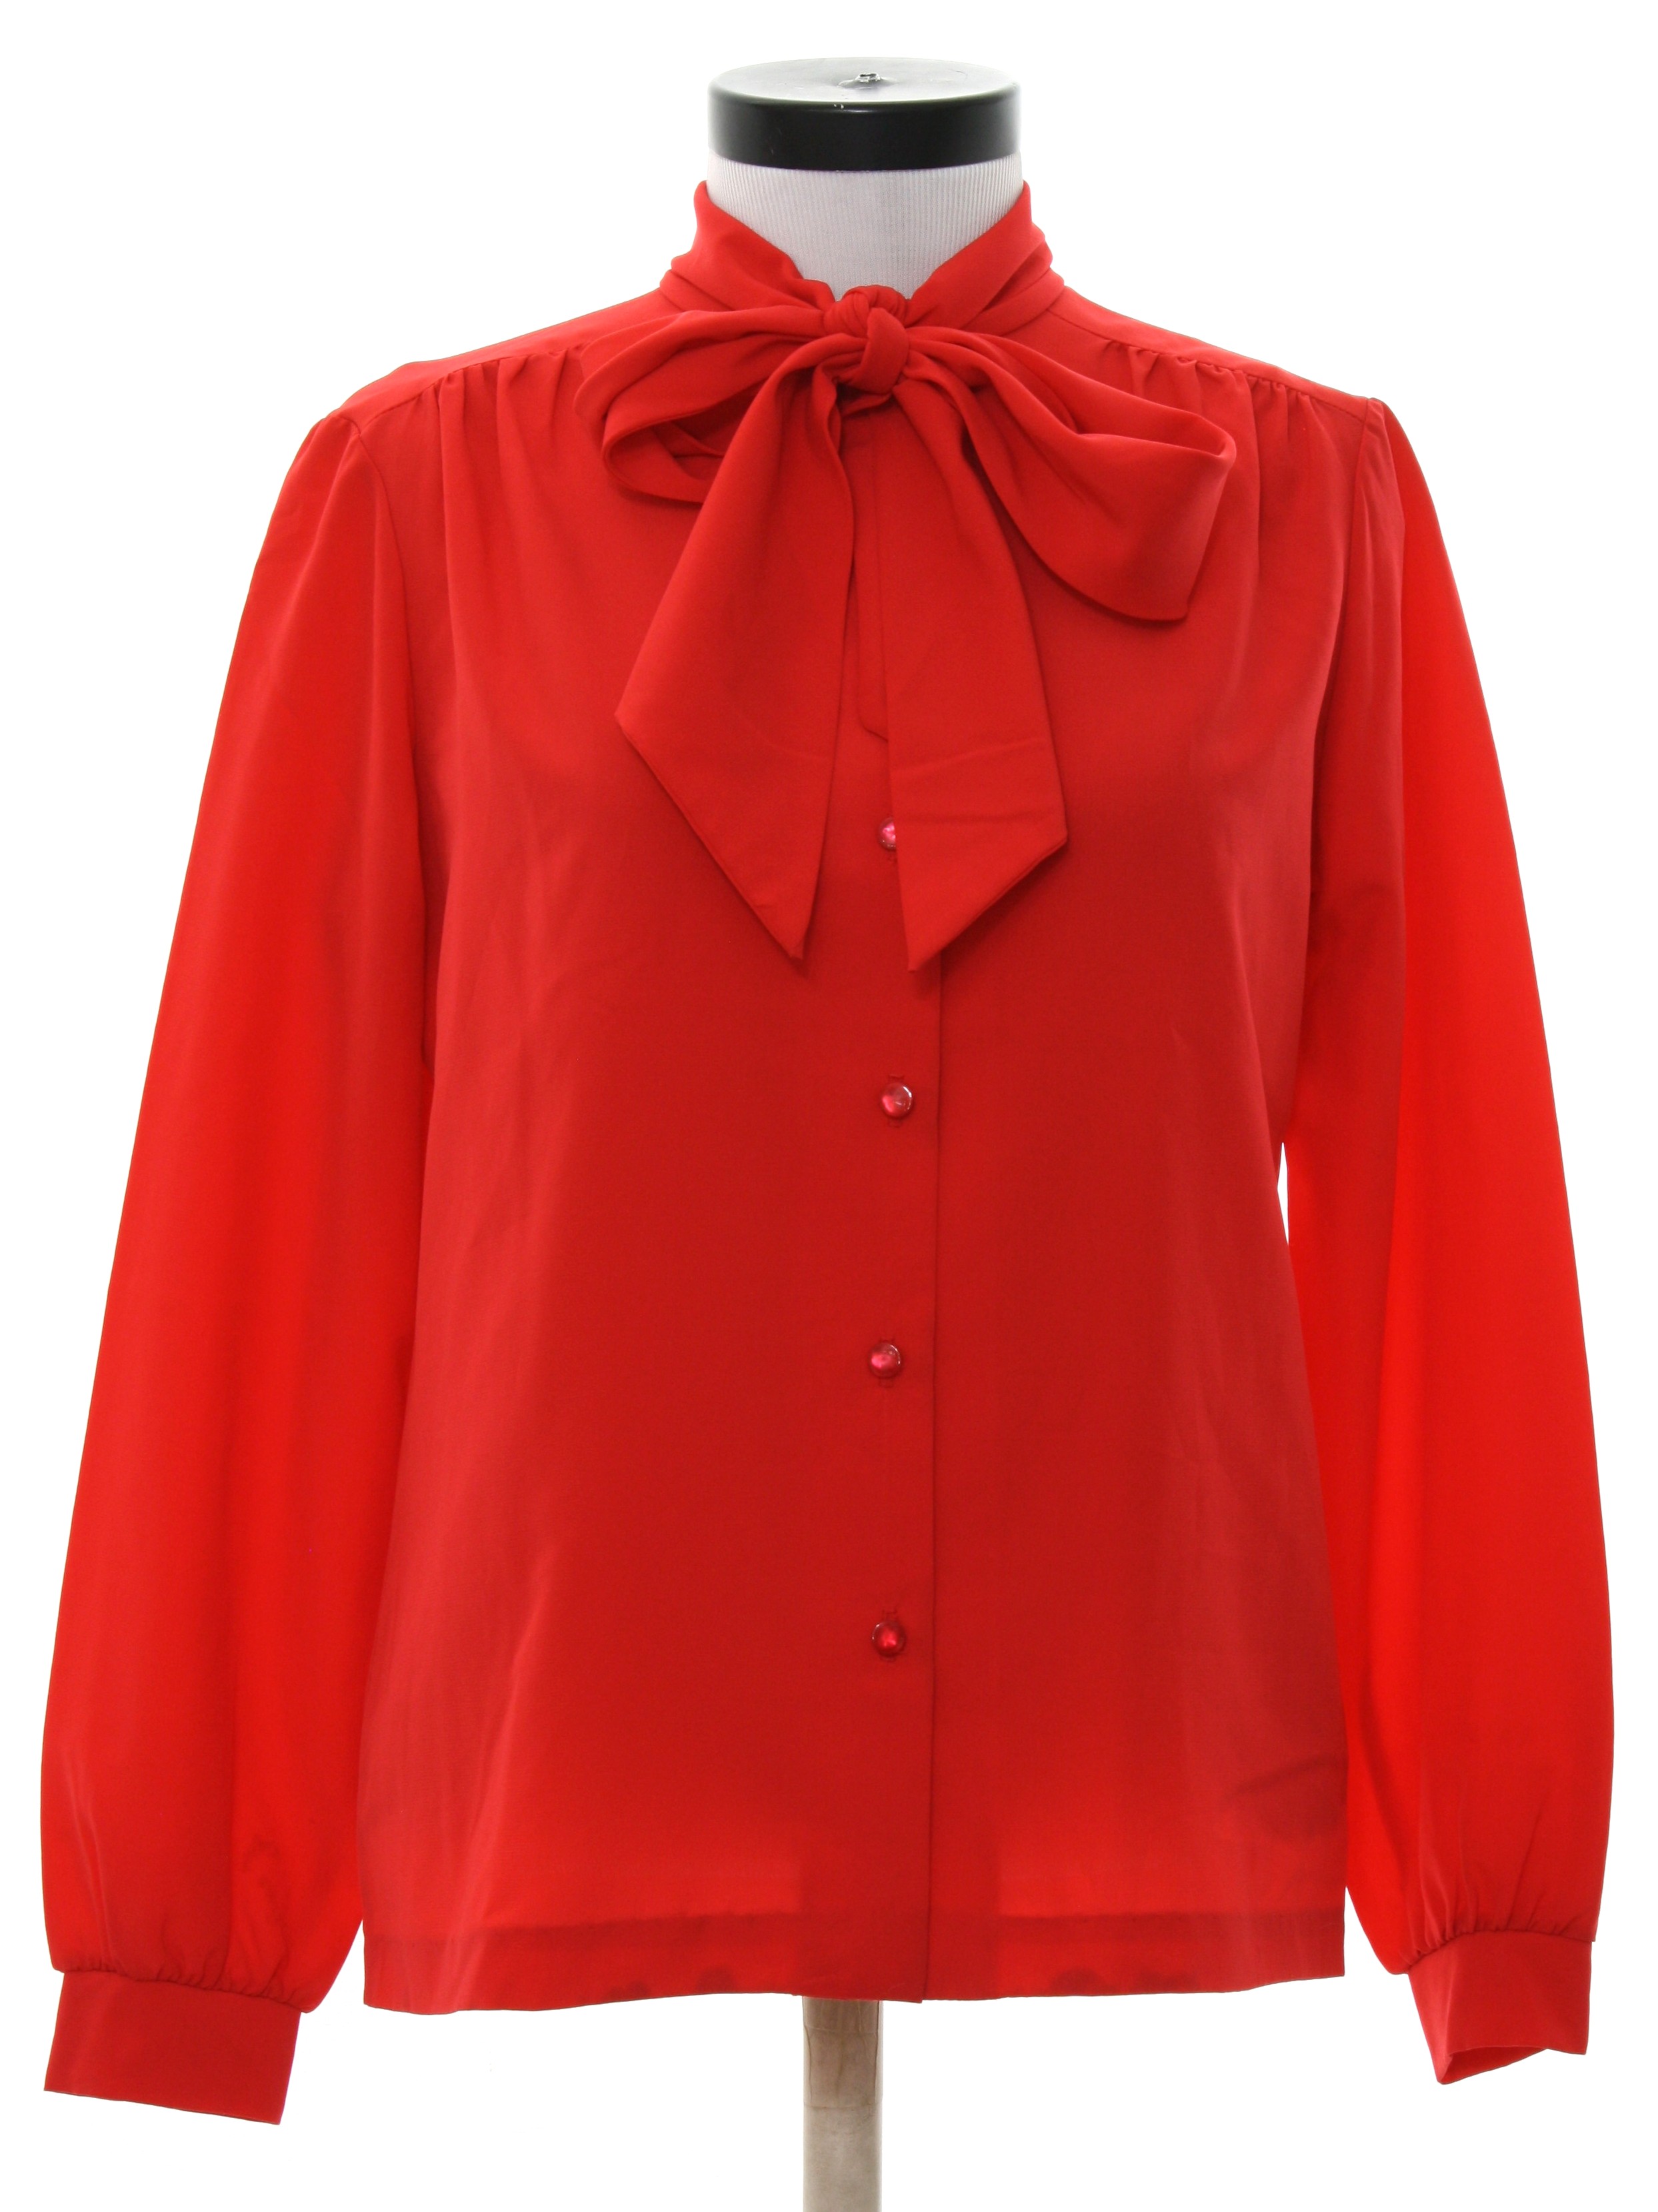 vintage red button up shirt women